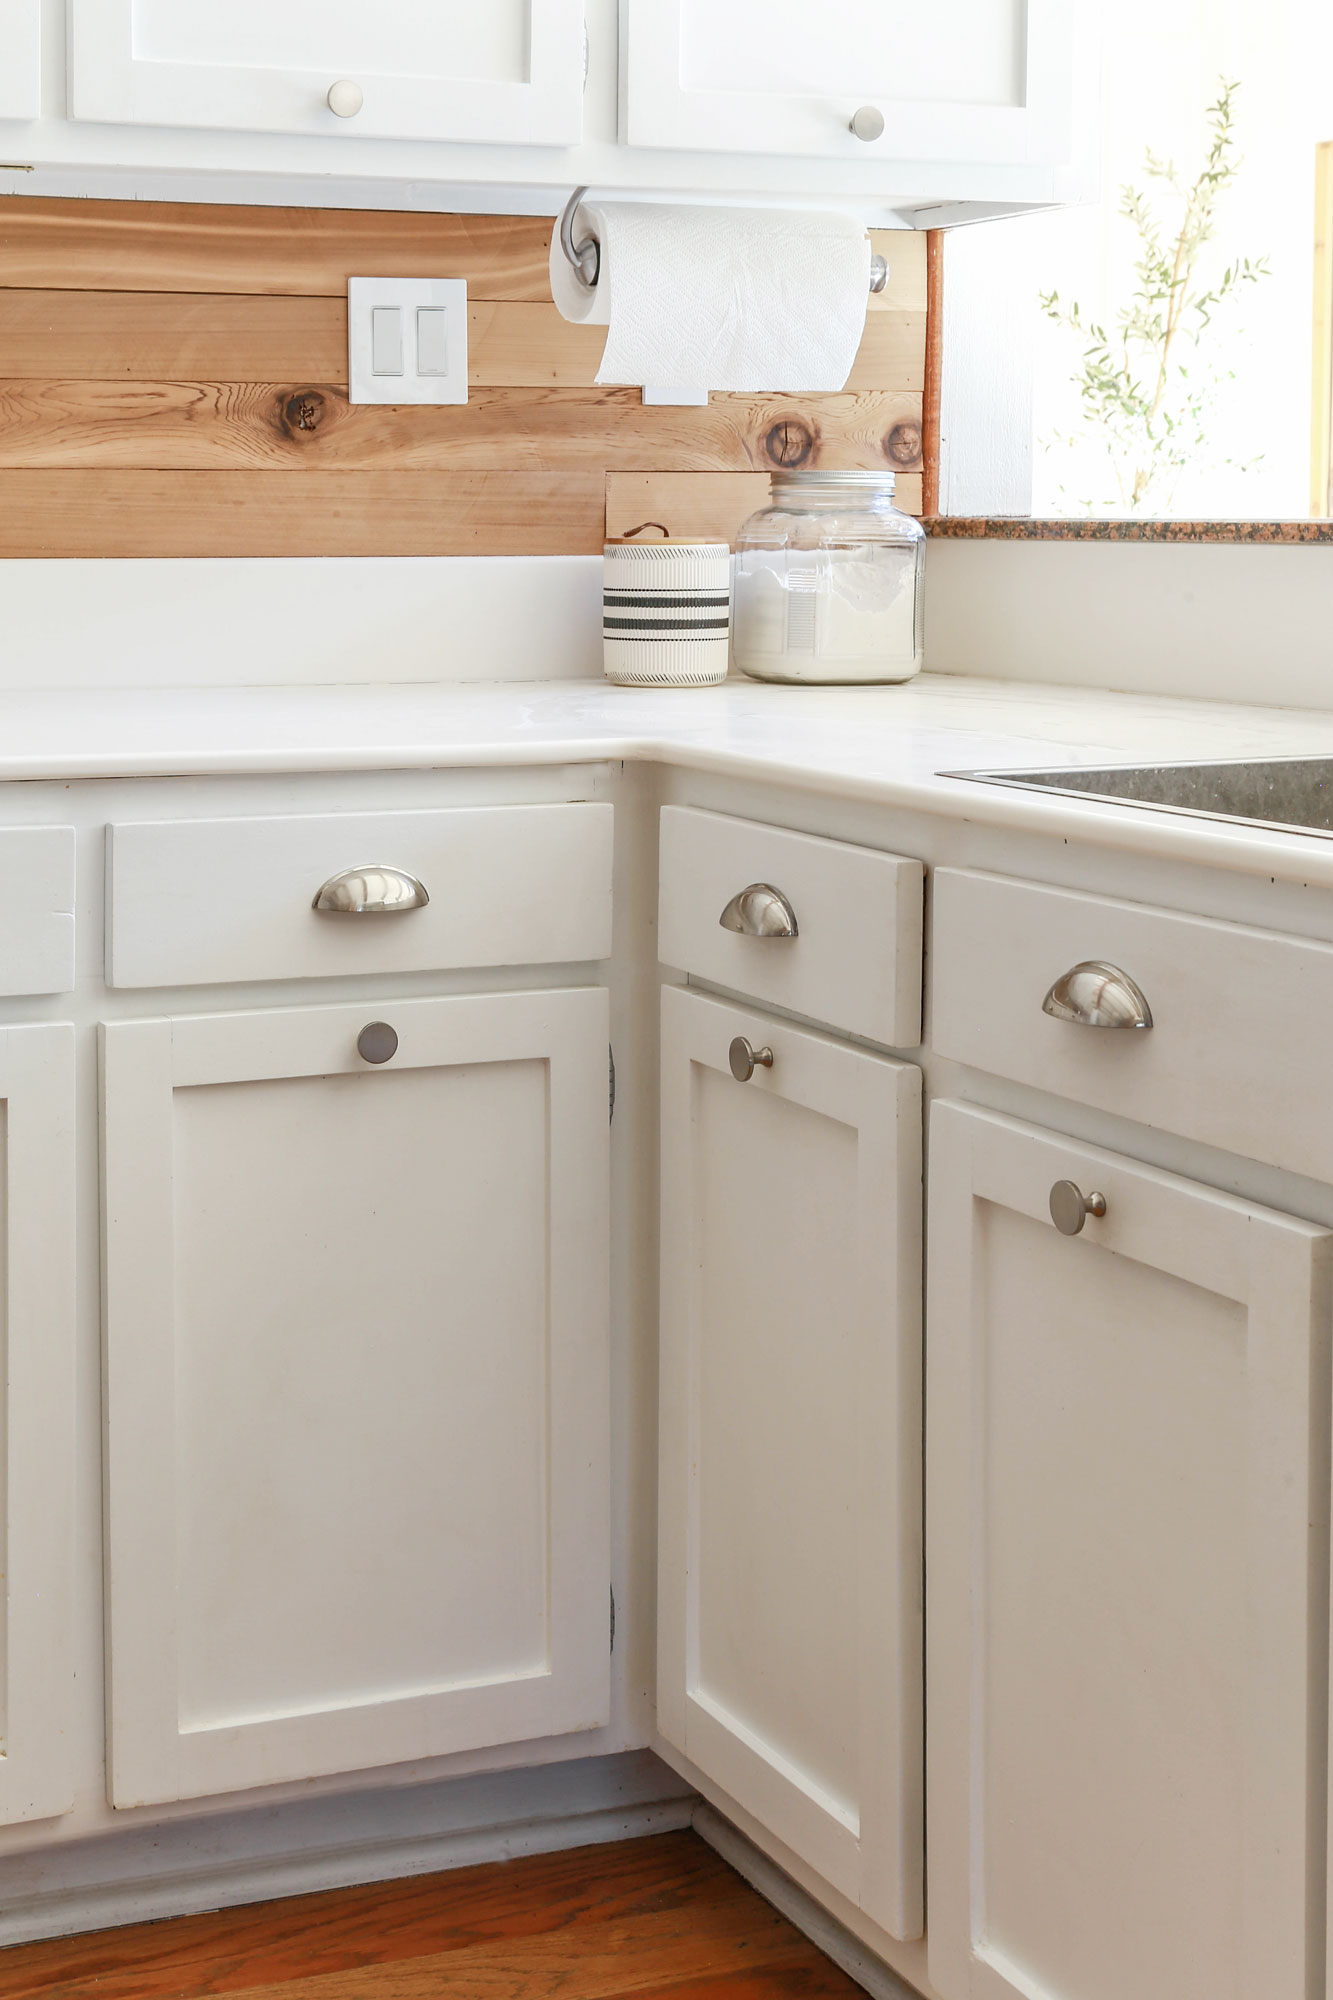 Convert a Cabinet into a Pull-Out Trash Bin - A Beautiful Mess